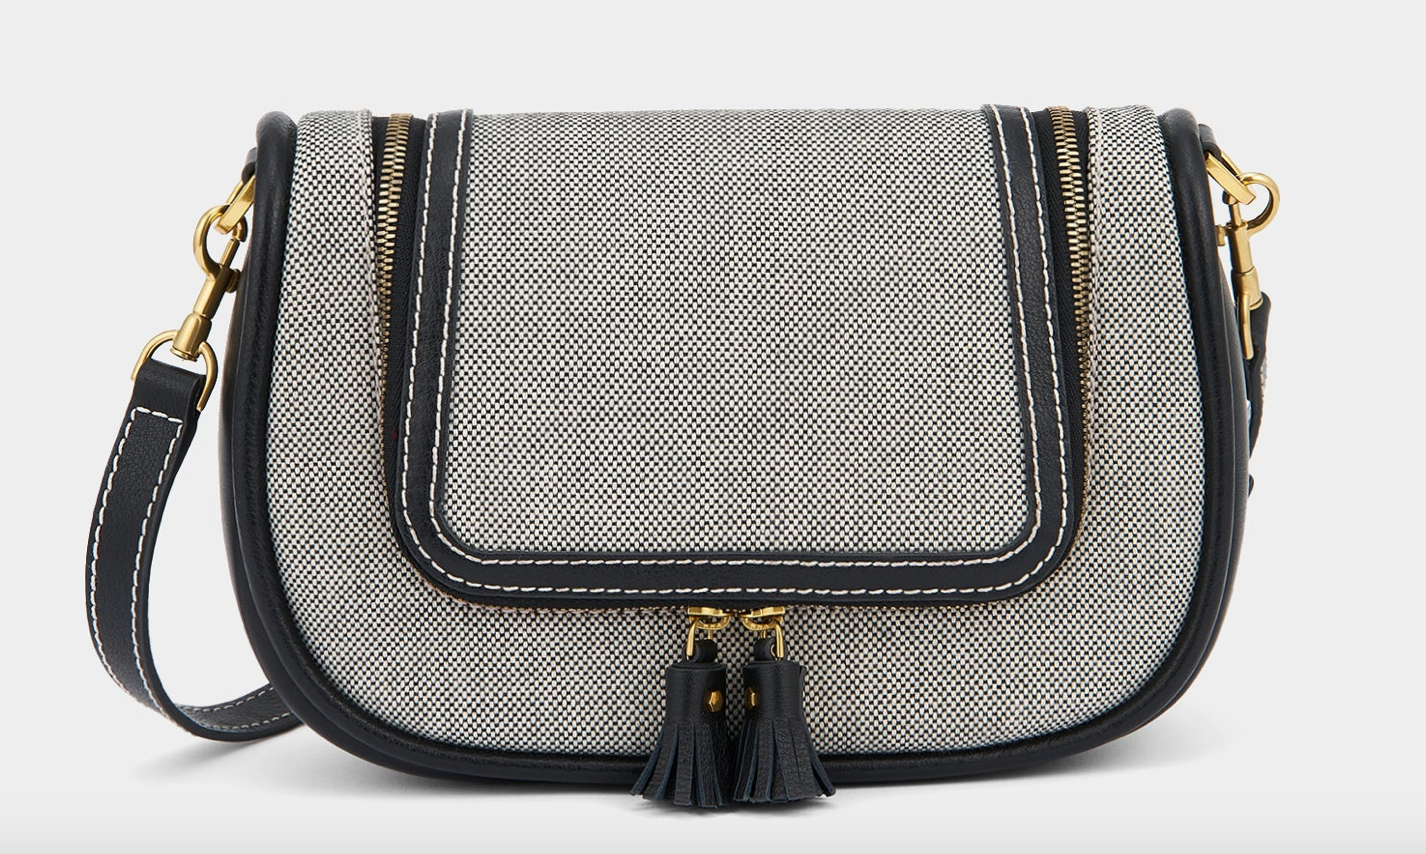 Hetre Alresford Hampshire Accessory Store ANYA HINDMARCH Mixed canvas Small Vere Soft Satchel  